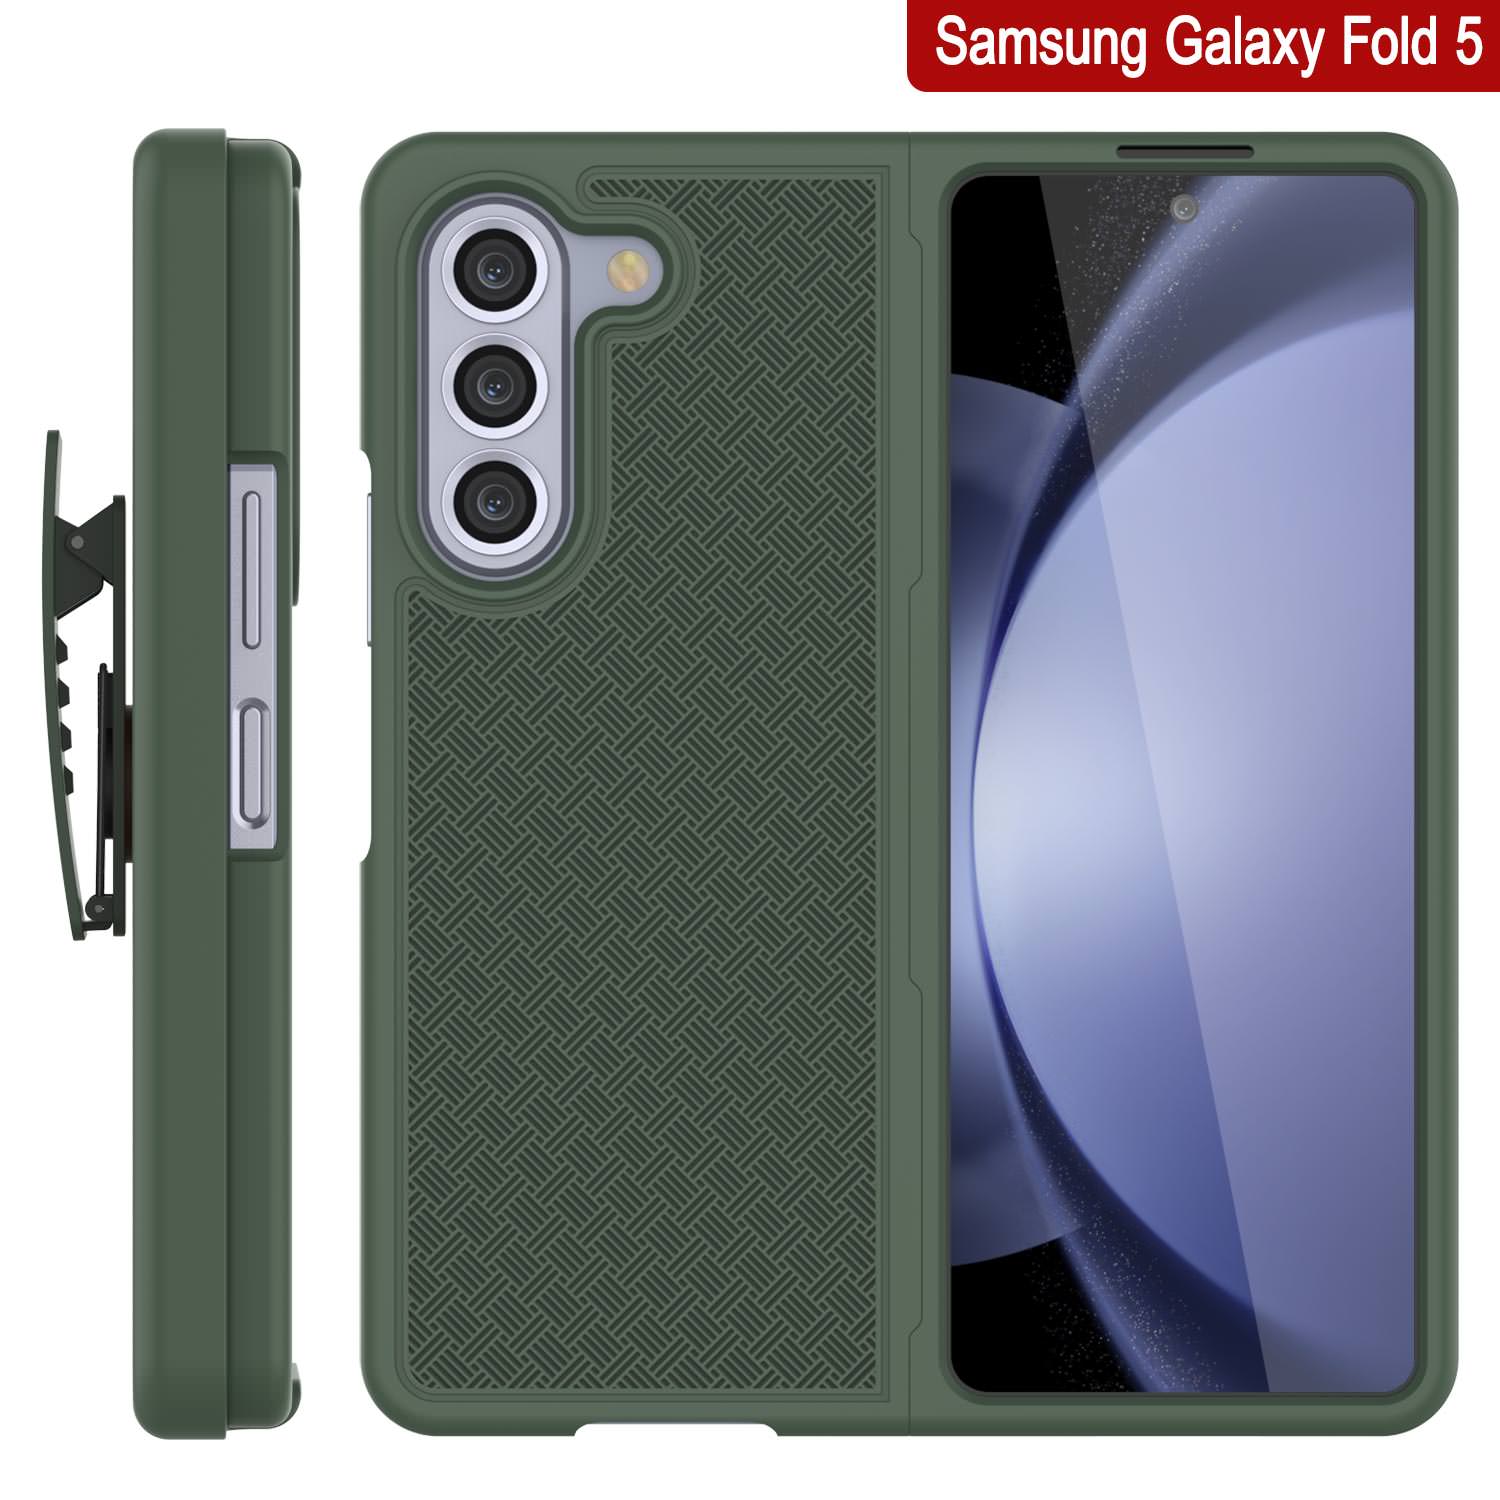 Galaxy Z Fold5 Case With Tempered Glass Screen Protector, Holster Belt Clip & Built-In Kickstand [Green]